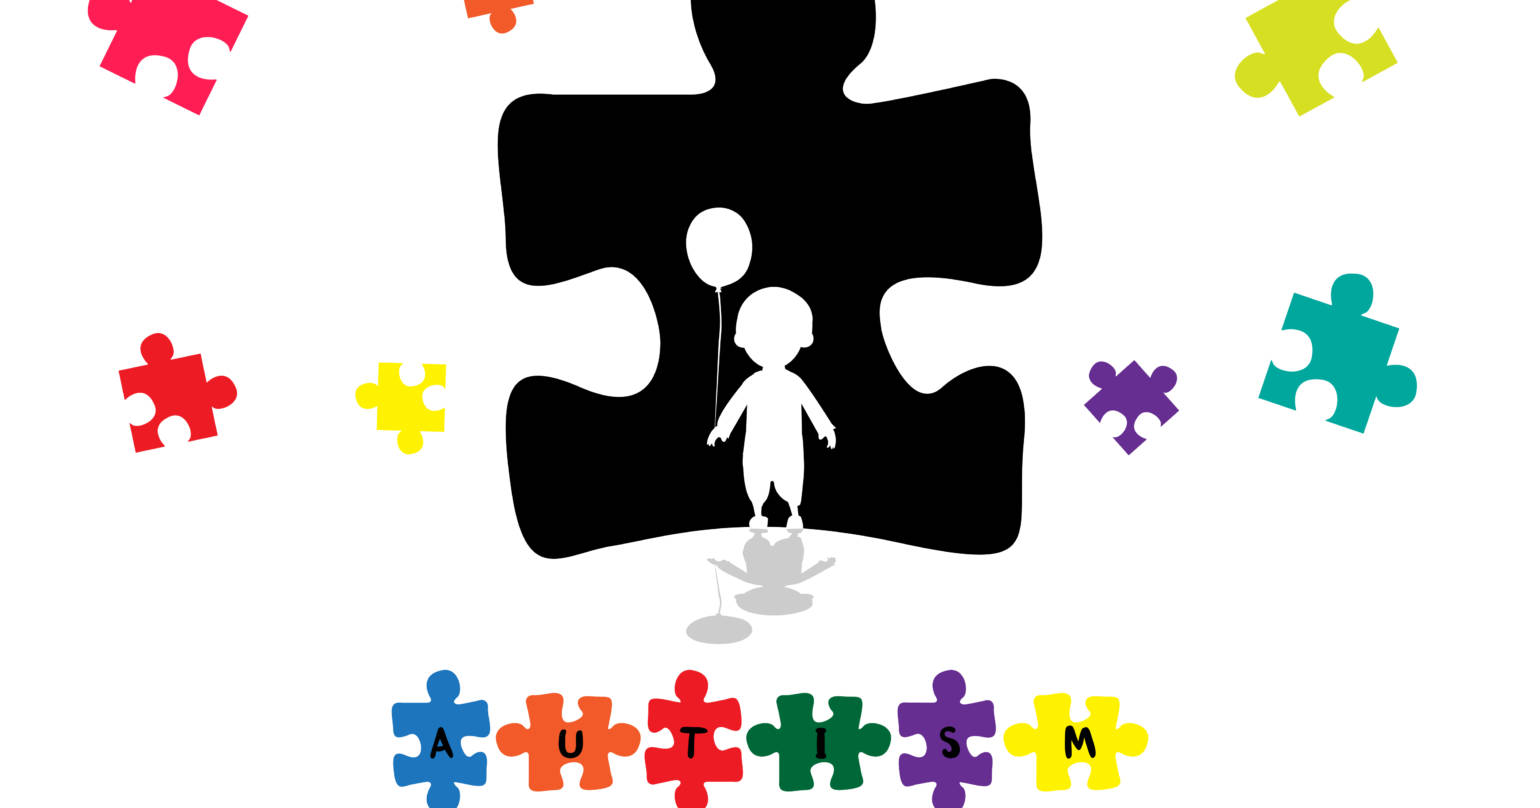 Overcoming the Challenges of Autism